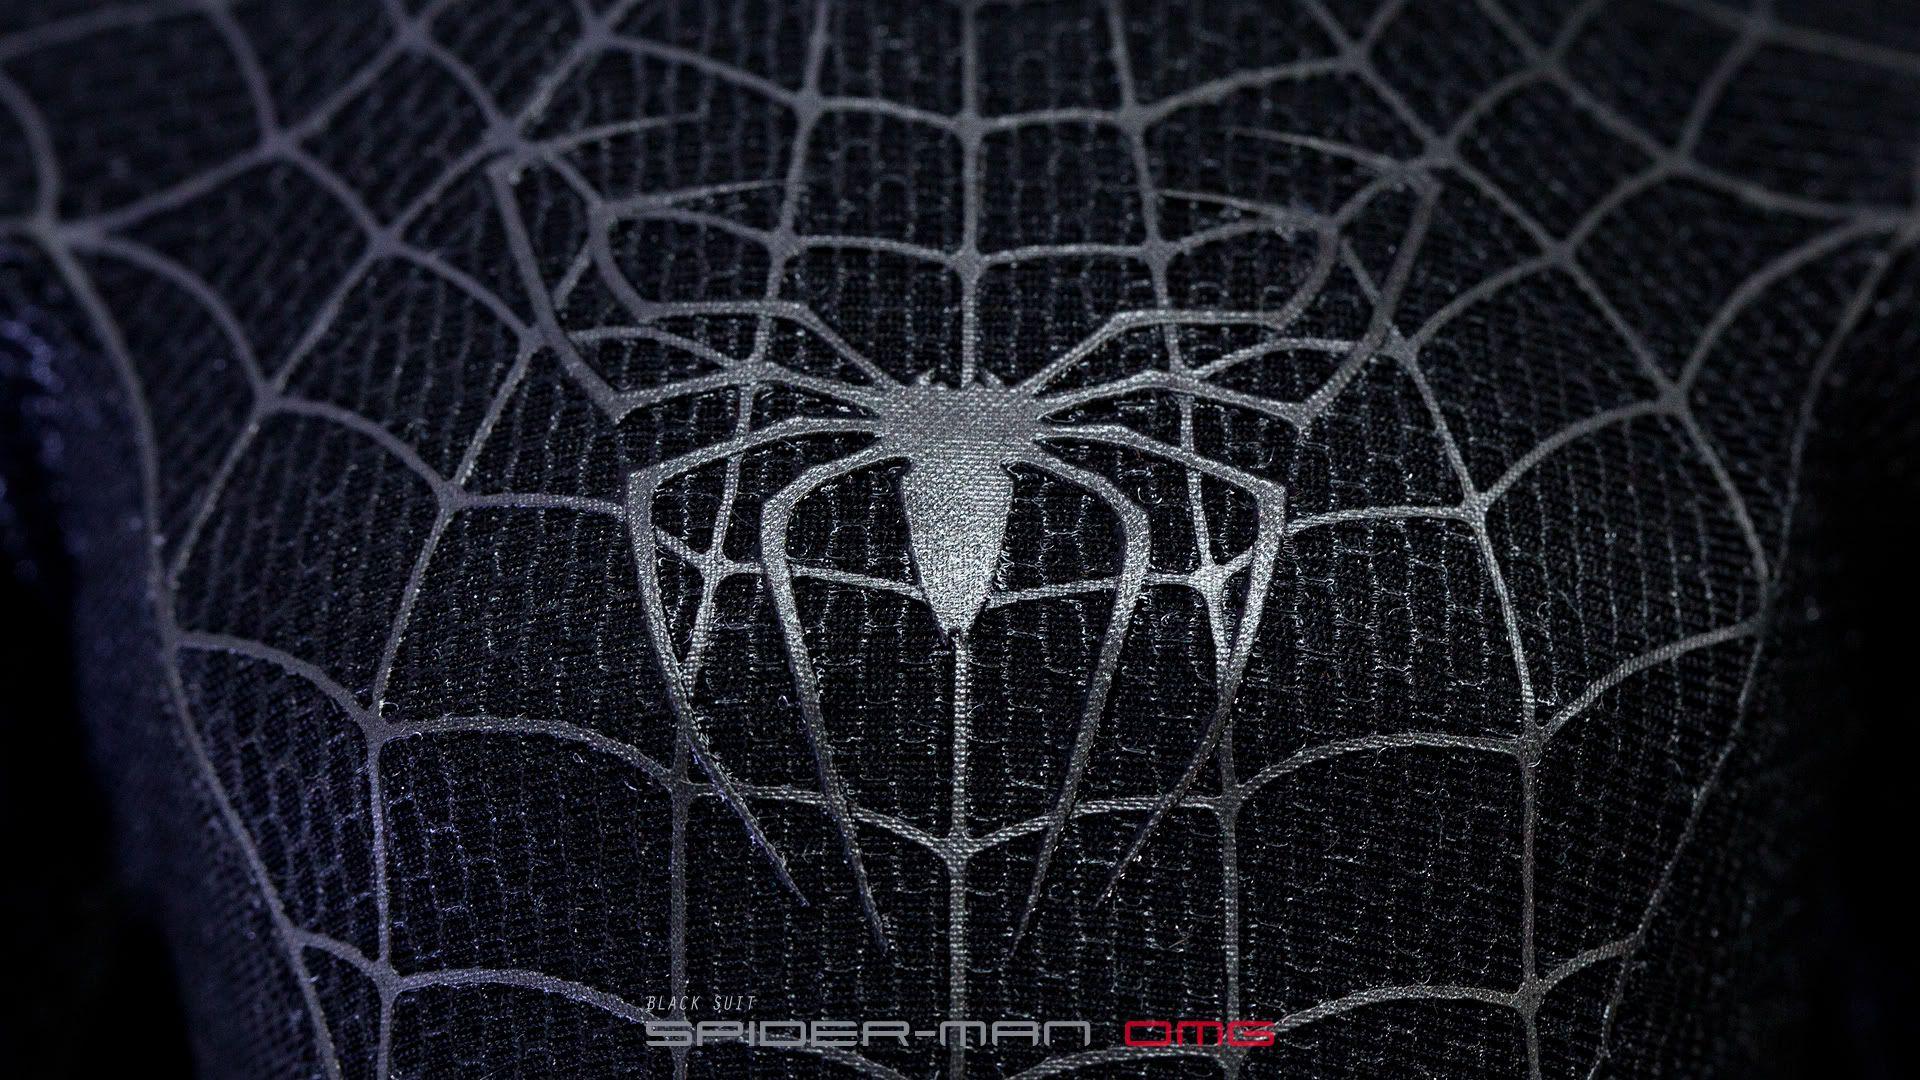 black spiderman wallpaper for android HD black spiderman